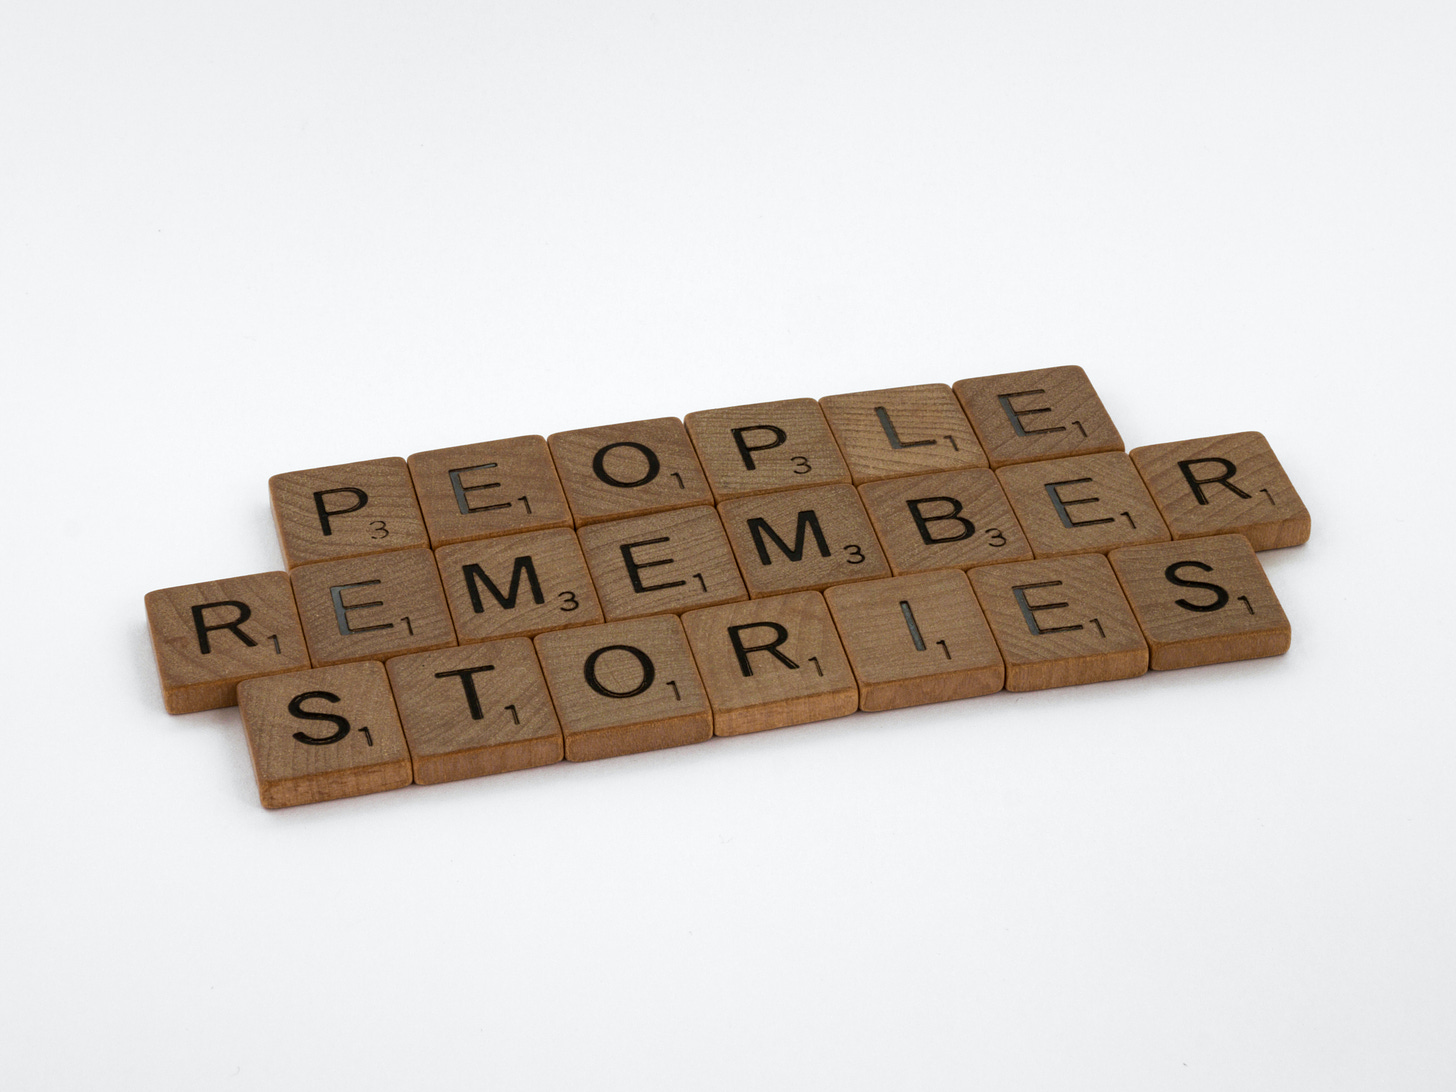 Scrabble tiles reading PEOPeople Remember Stories on white background